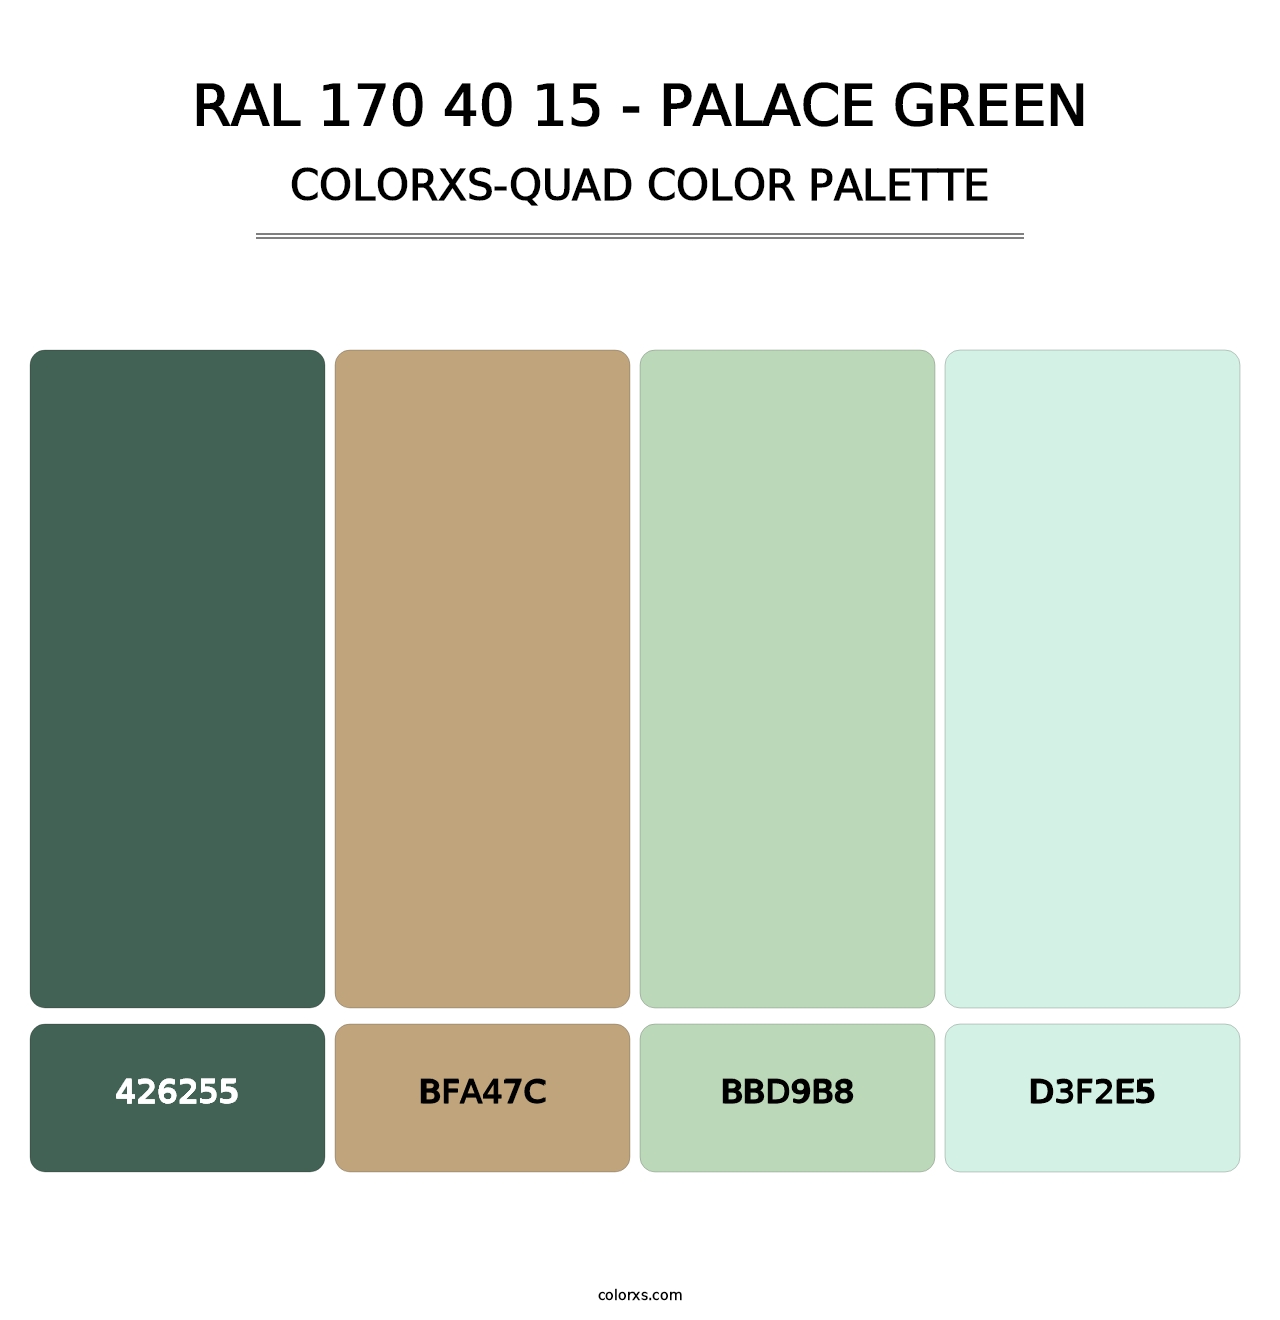 RAL 170 40 15 - Palace Green - Colorxs Quad Palette